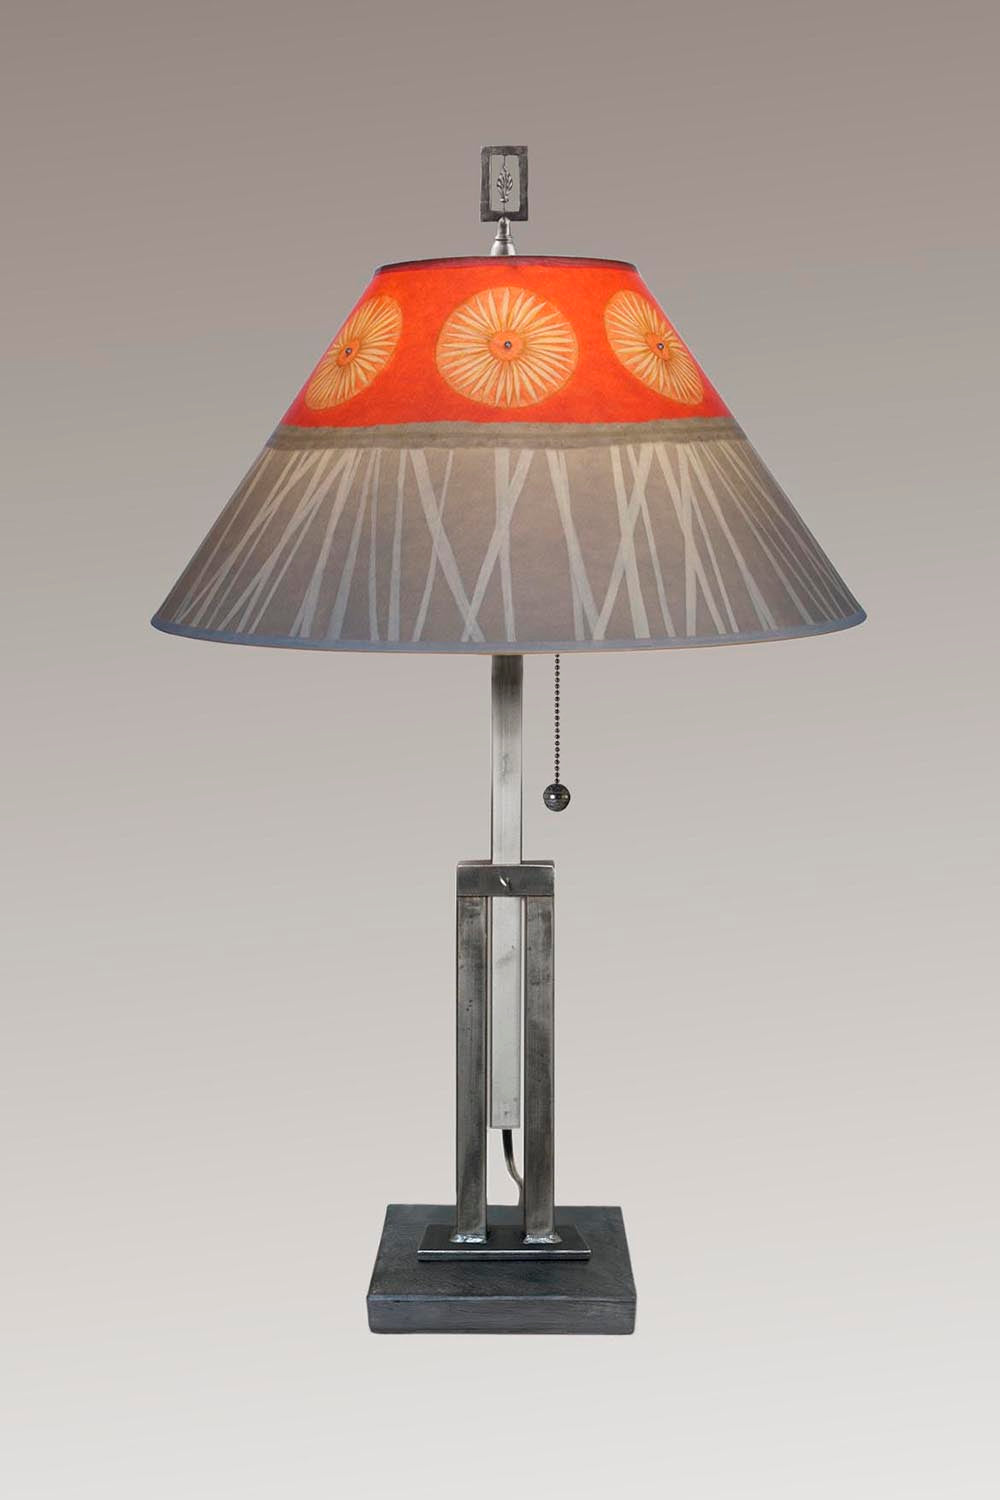 Janna Ugone &amp; Co Table Lamps Adjustable-Height Steel Table Lamp with Large Conical Shade in Tang